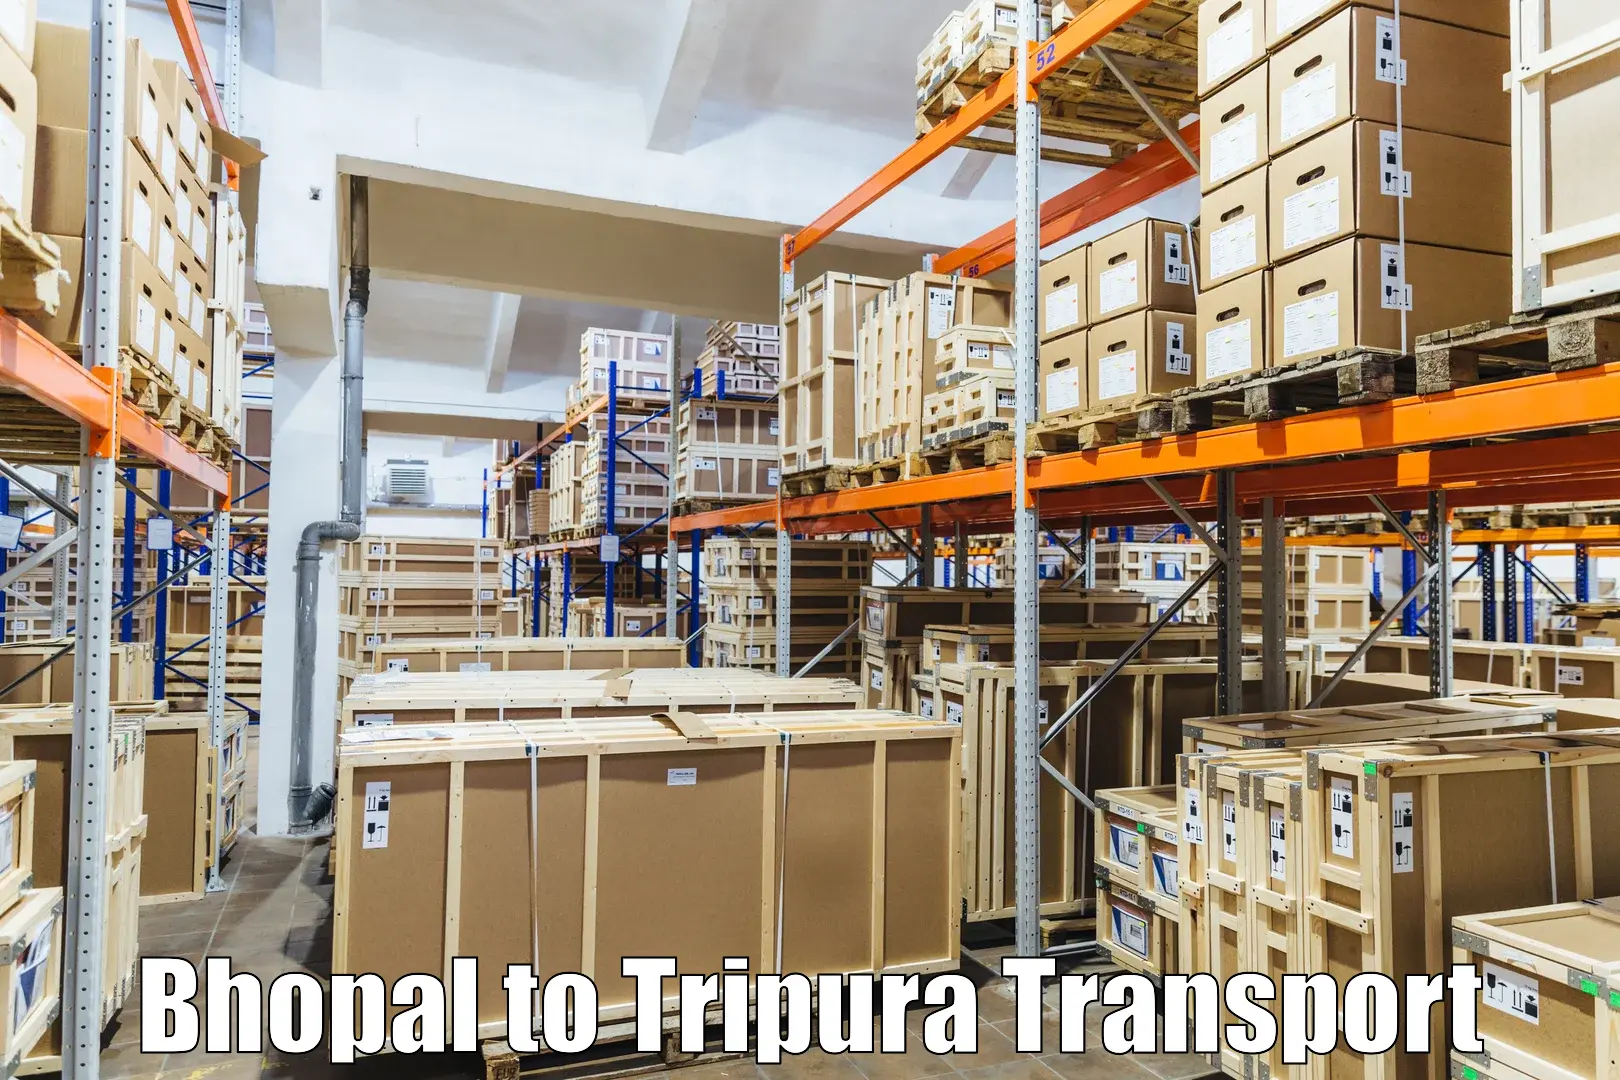 Luggage transport services Bhopal to Udaipur Tripura